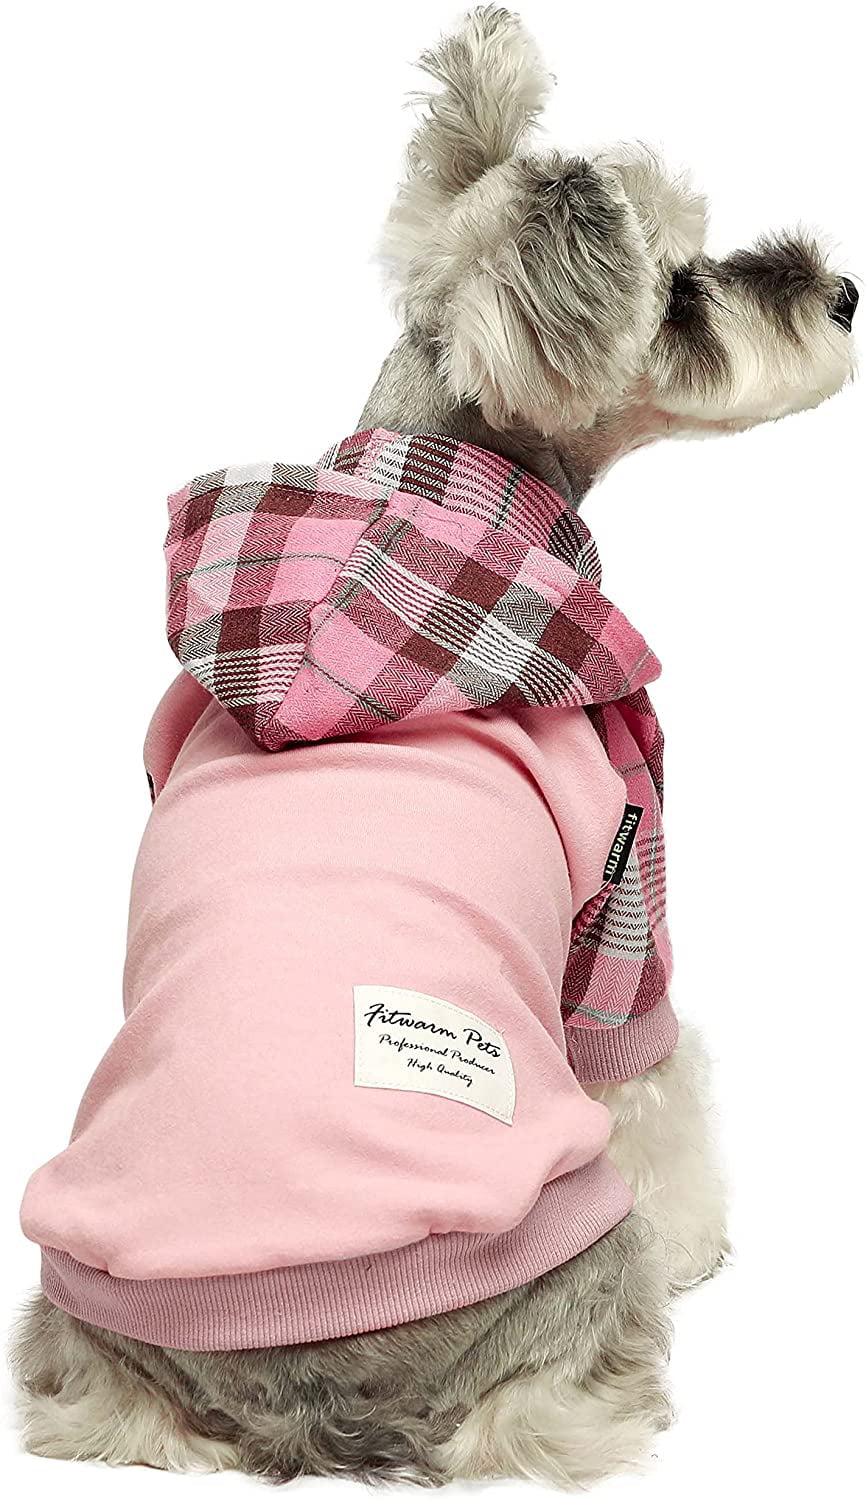 Fitwarm 100% Cotton Plaid Dog Clothes Lightweight Puppy Hoodie Pet Sweatshirt Doggie Hooded Outfits Cat Apparel 